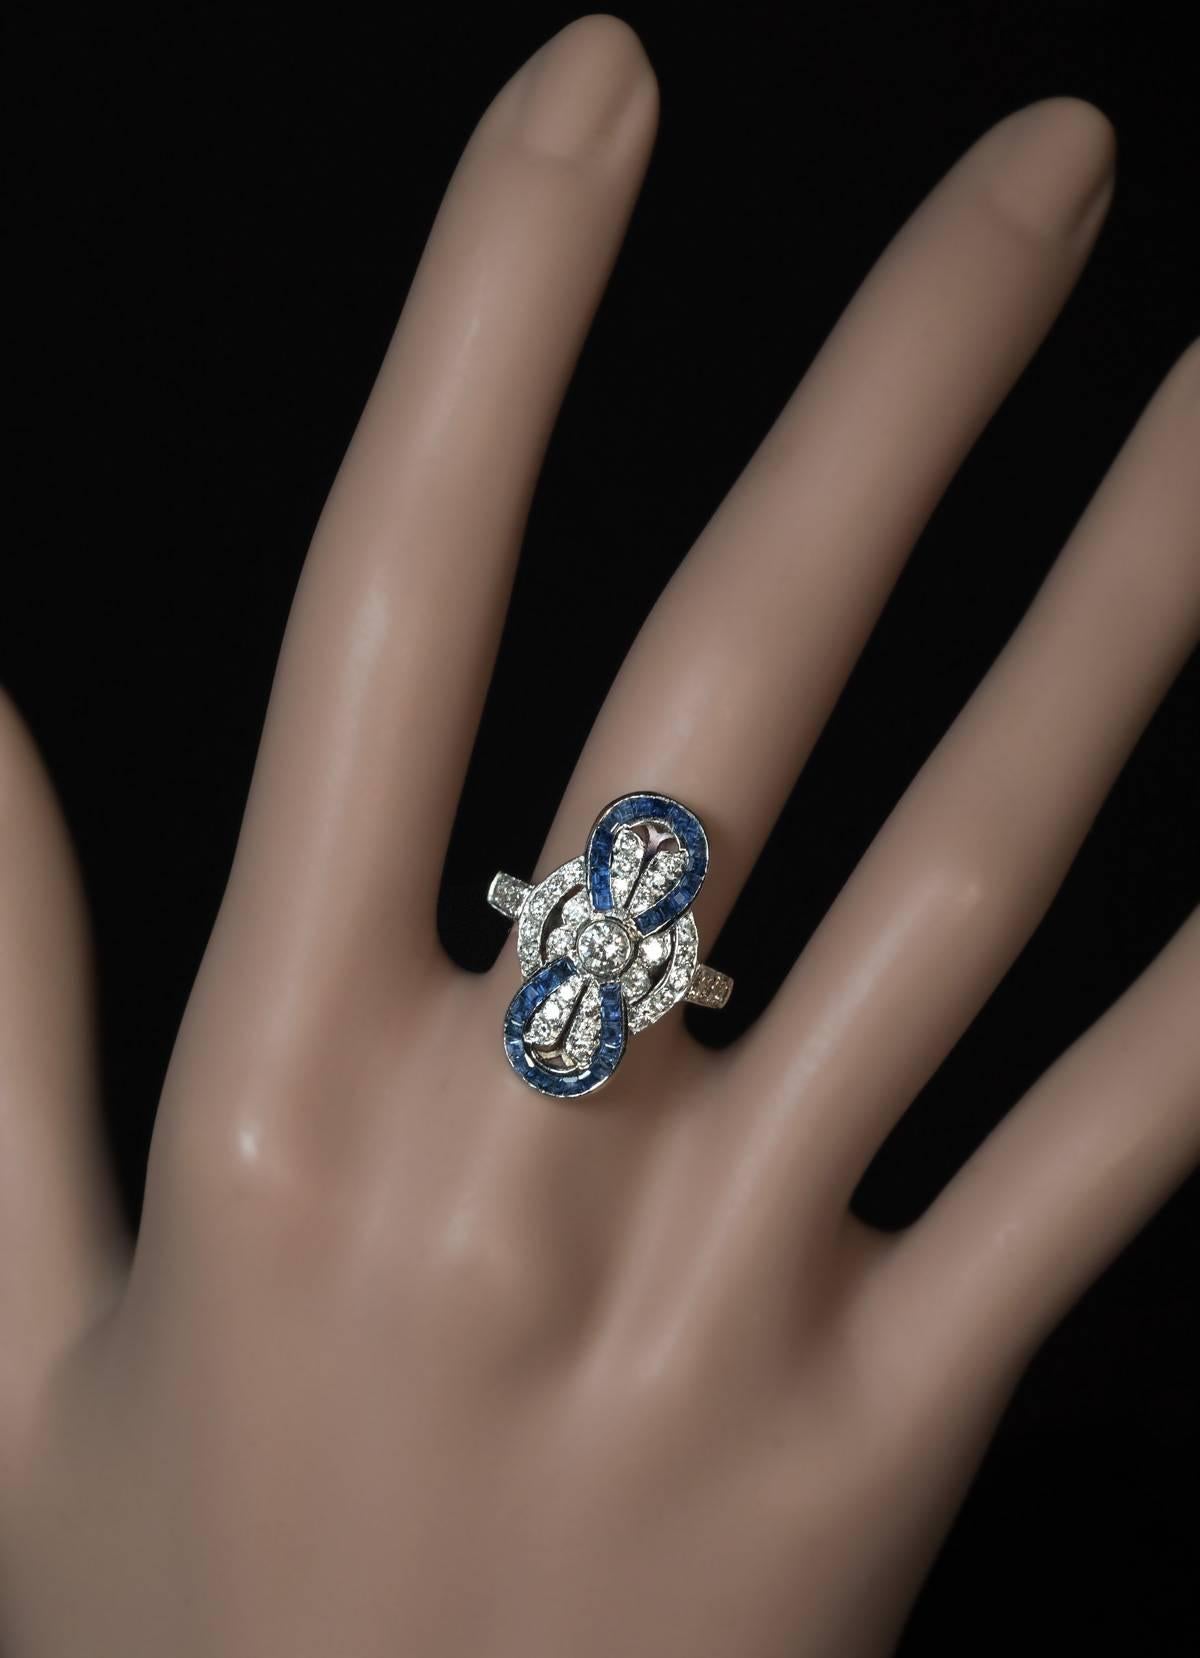 Circa 1950s

A white and yellow 18K gold bow motif ring is set with bright white brilliant cut diamonds and calibre cut (French cut) sapphires.

Estimated total diamond weight is 1 carat.

Size of the diamond and sapphire top 23 x 14 mm (15/16 x 1/2